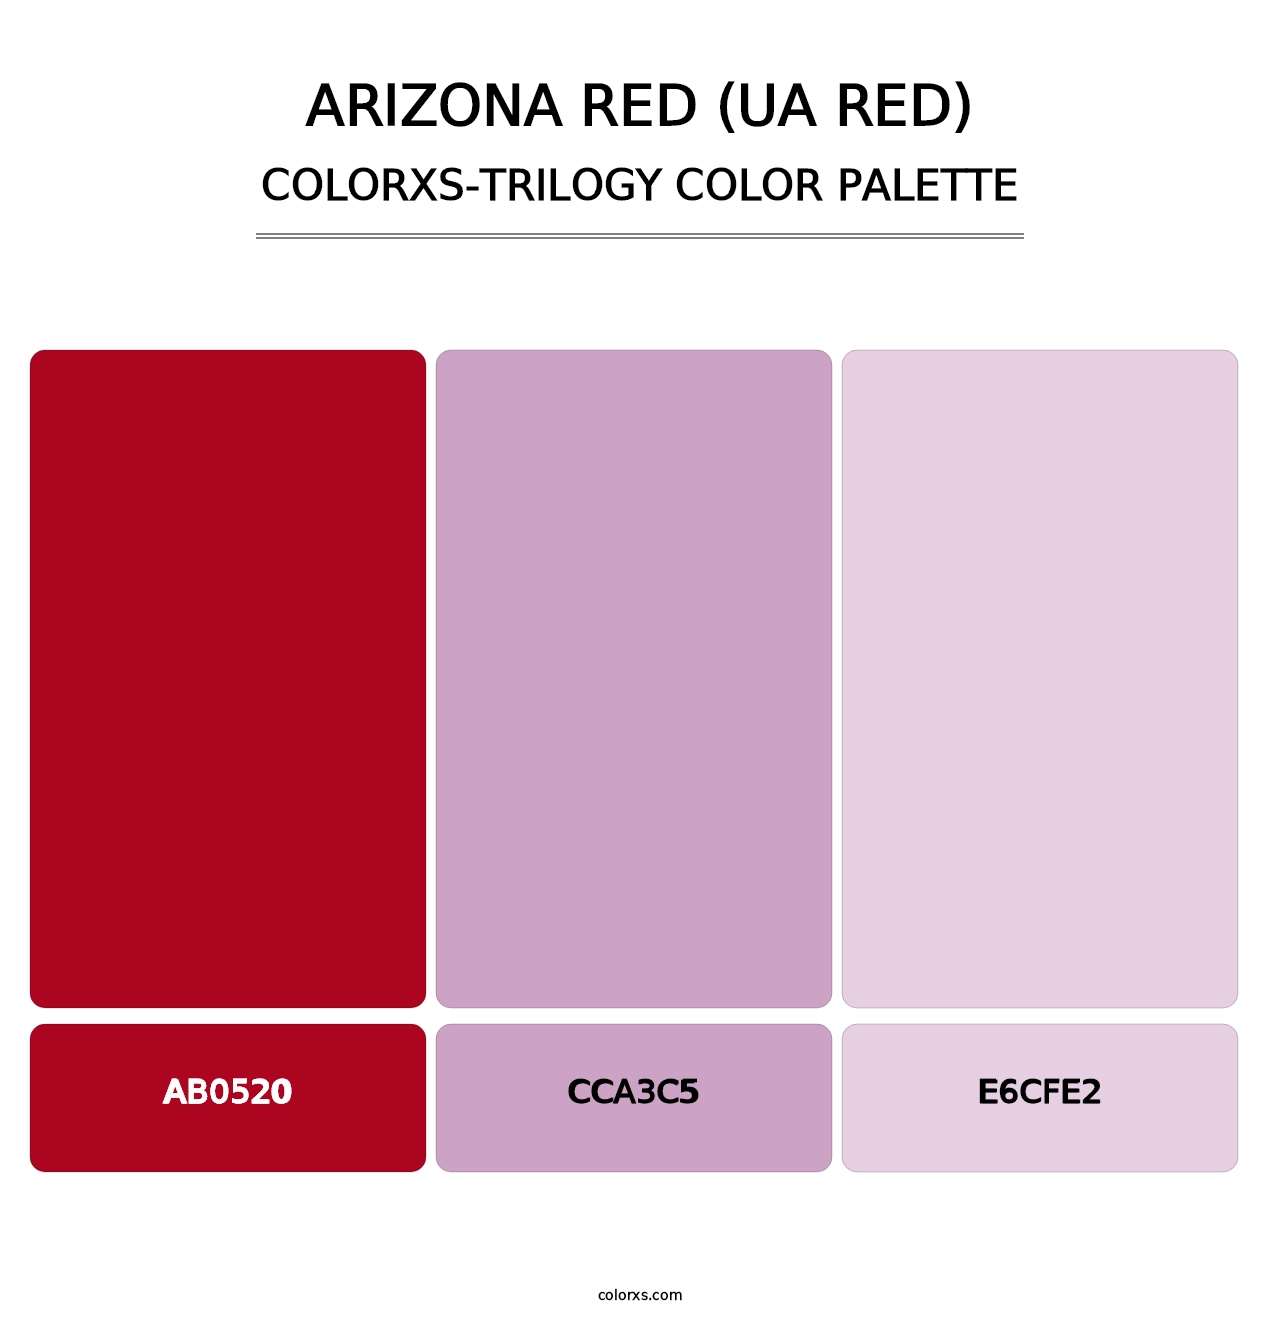 Arizona Red (UA Red) - Colorxs Trilogy Palette